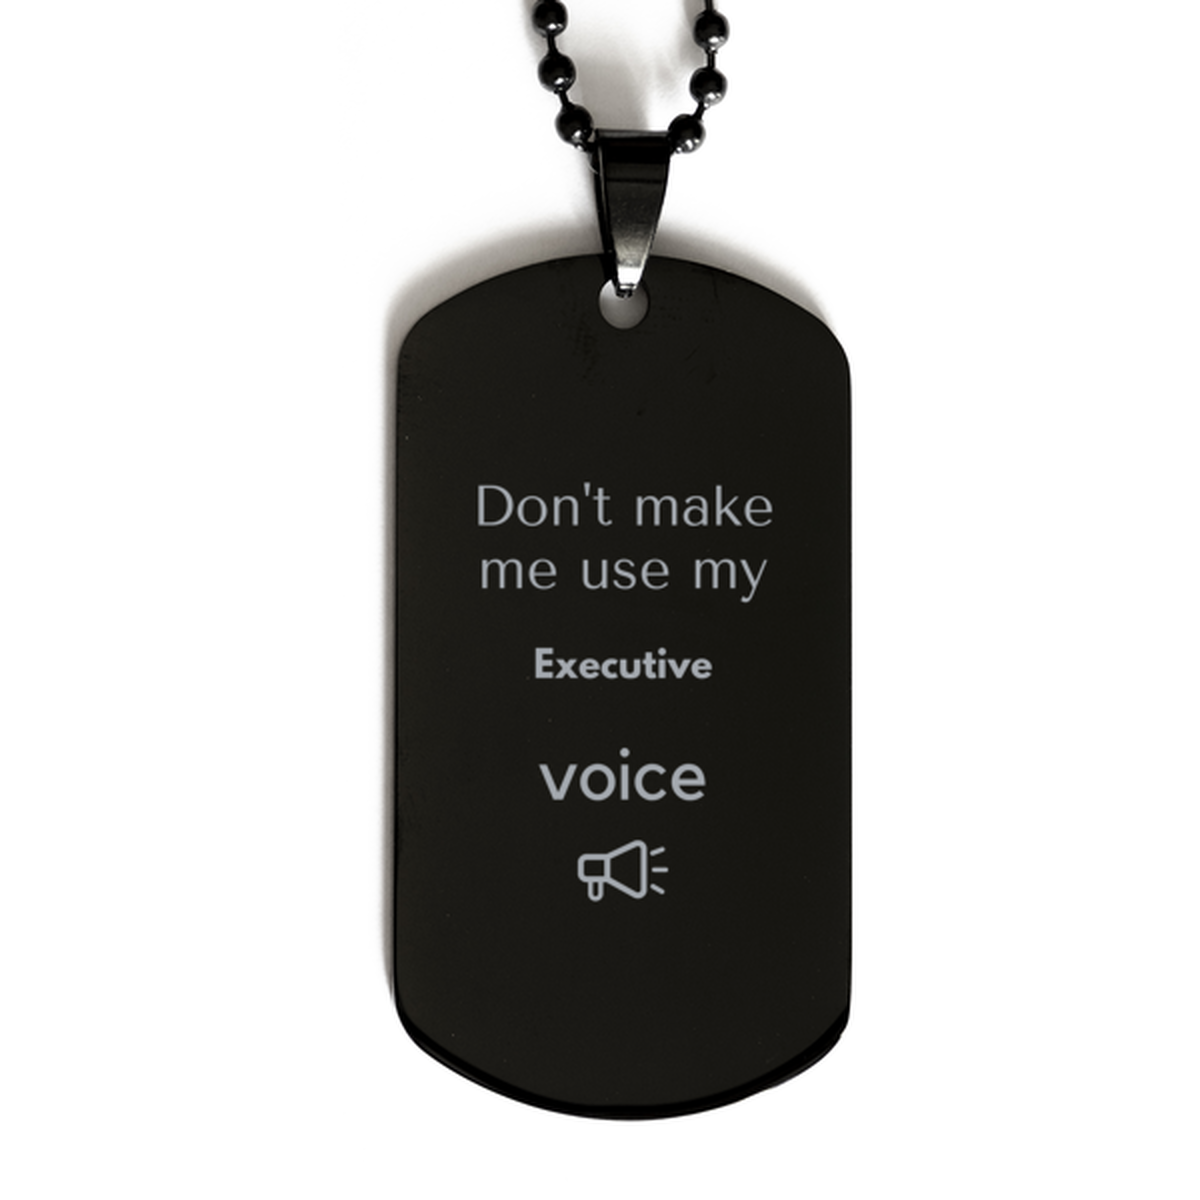 Don't make me use my Executive voice, Sarcasm Executive Gifts, Christmas Executive Black Dog Tag Birthday Unique Gifts For Executive Coworkers, Men, Women, Colleague, Friends